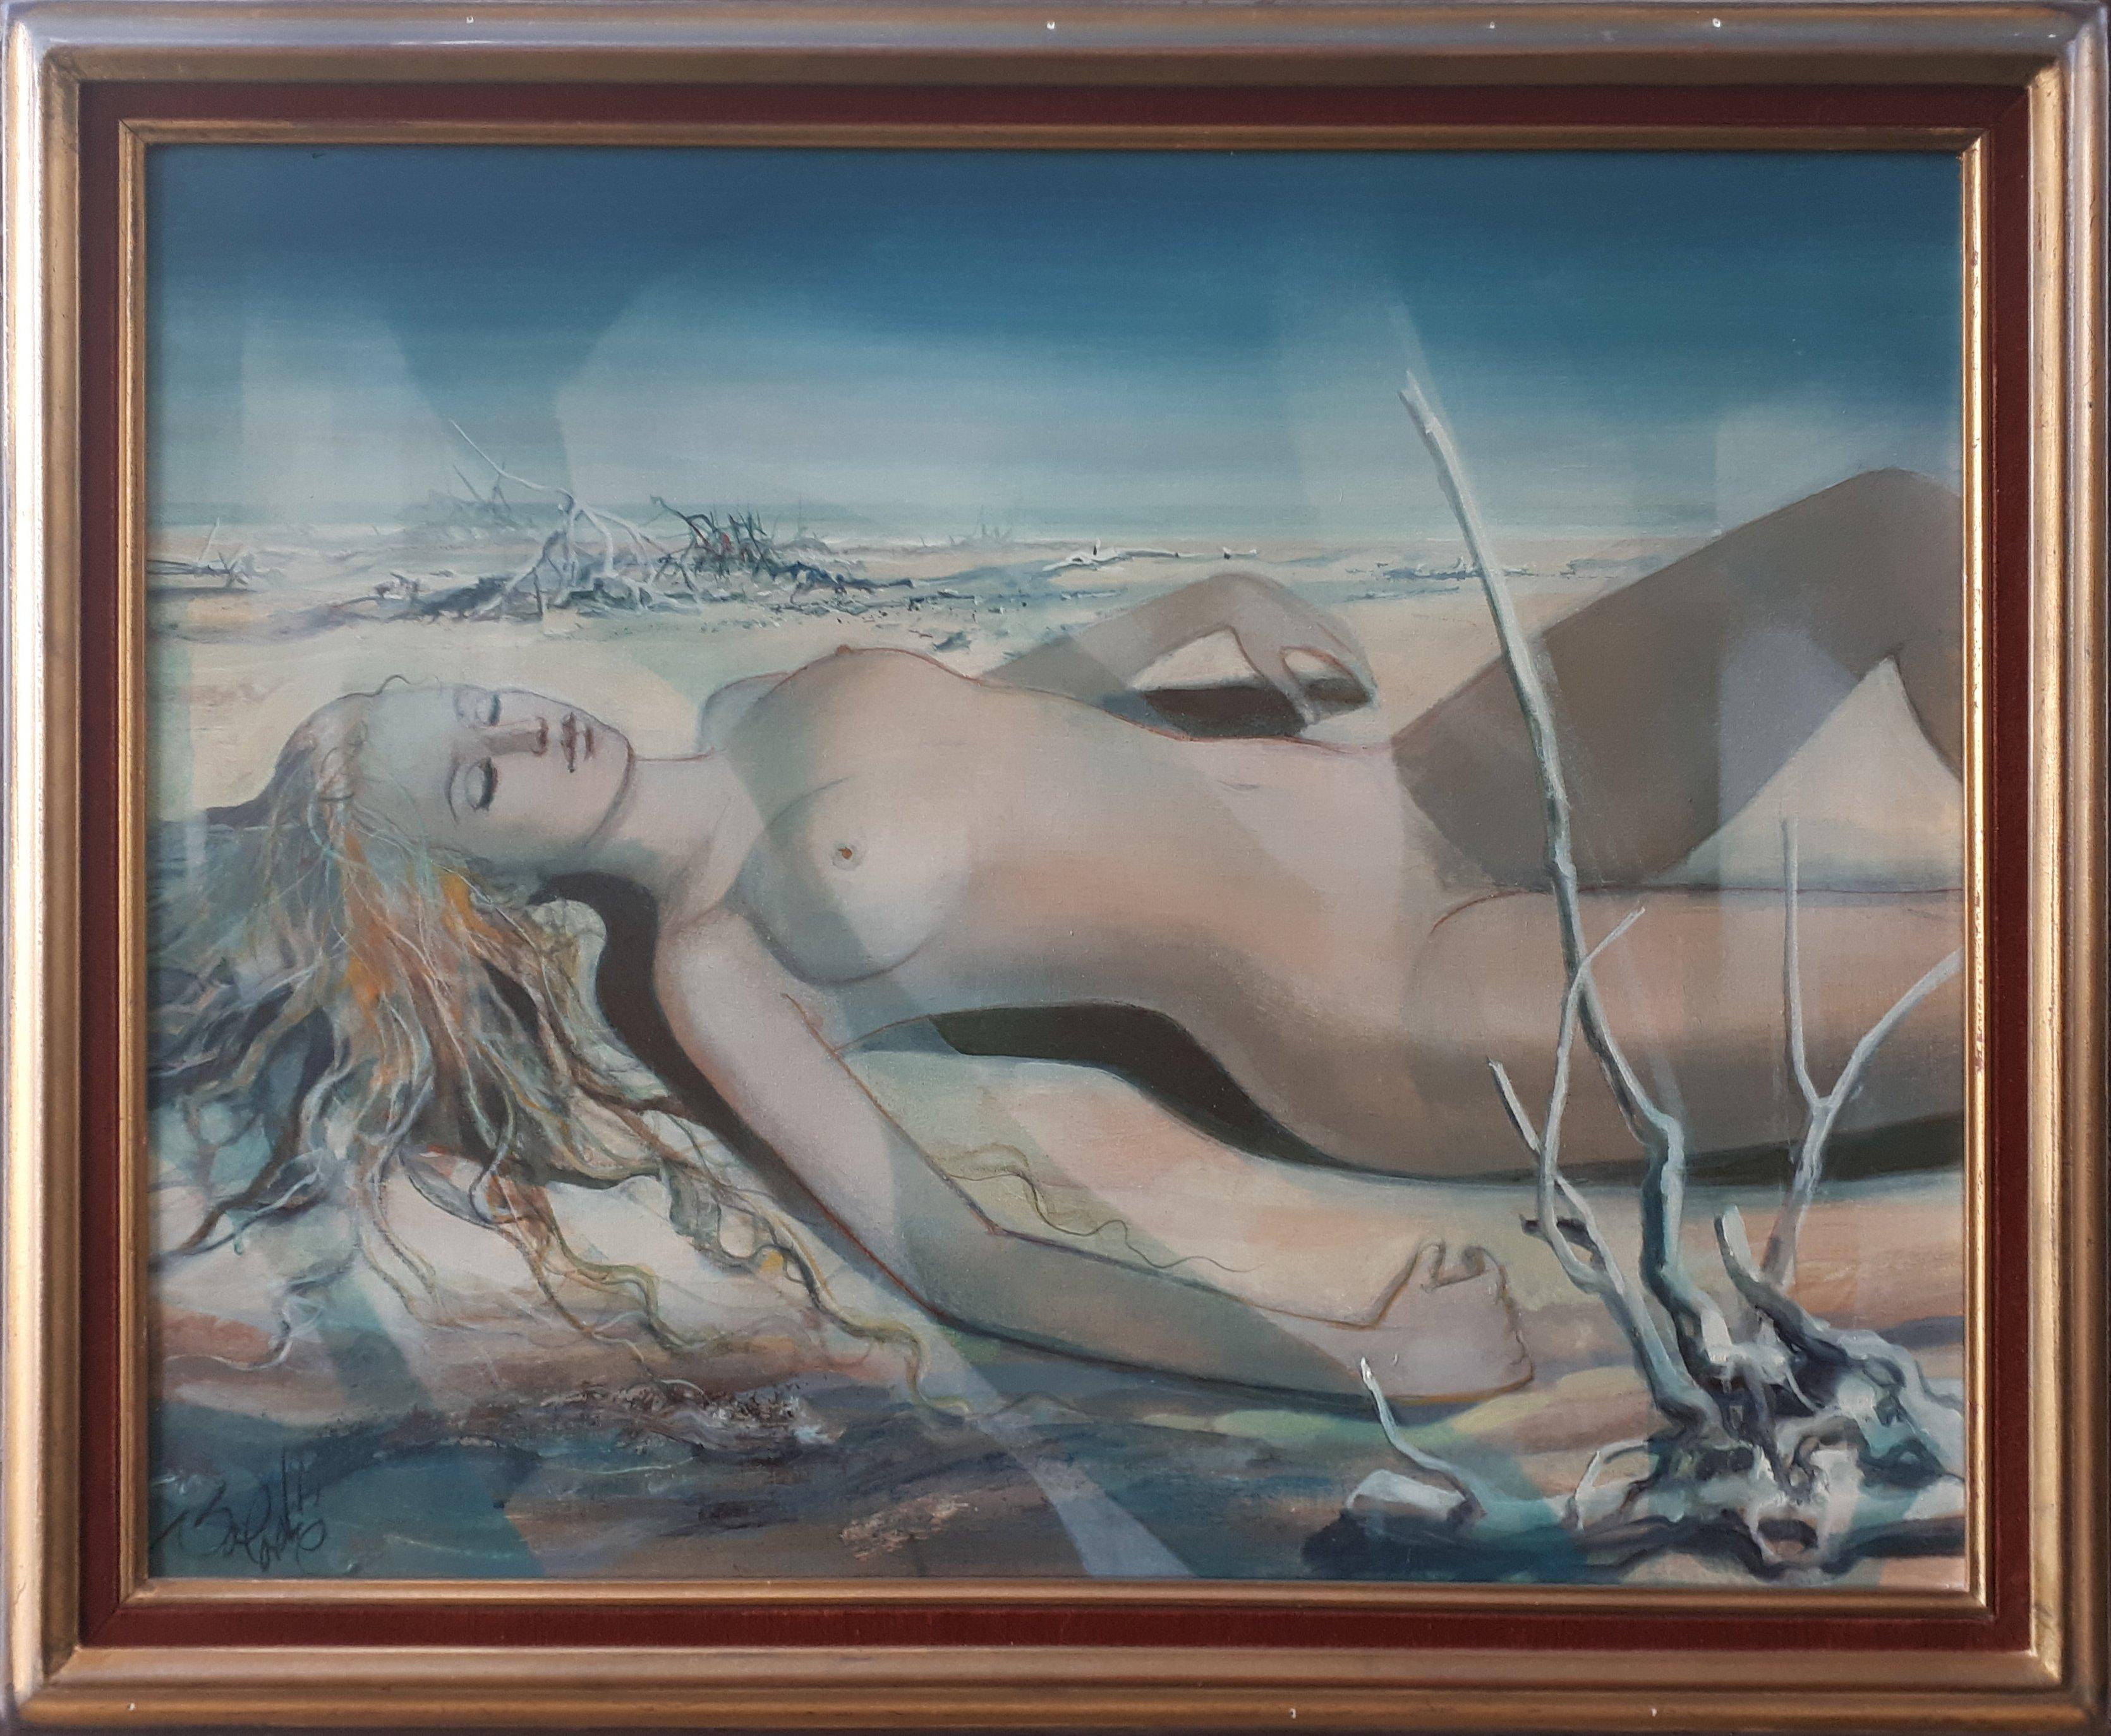 Asleep Young Woman - Handsigned oil on canvas - Modern Painting by Jean-Baptiste Valadie